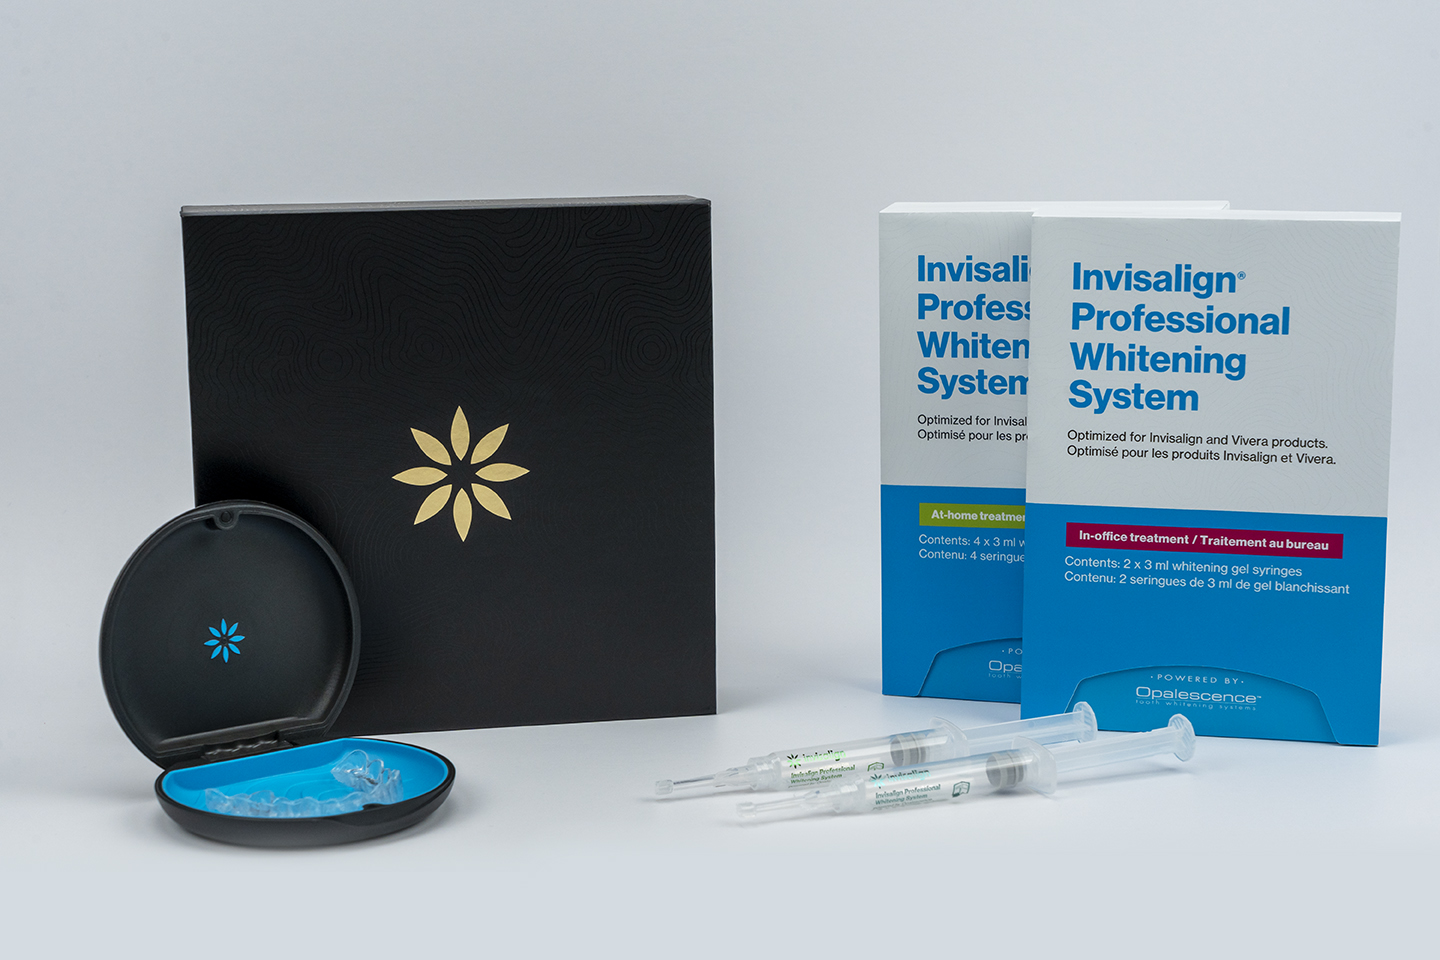 ‘Invisalign Professional Whitening System – powered by Opalescence’